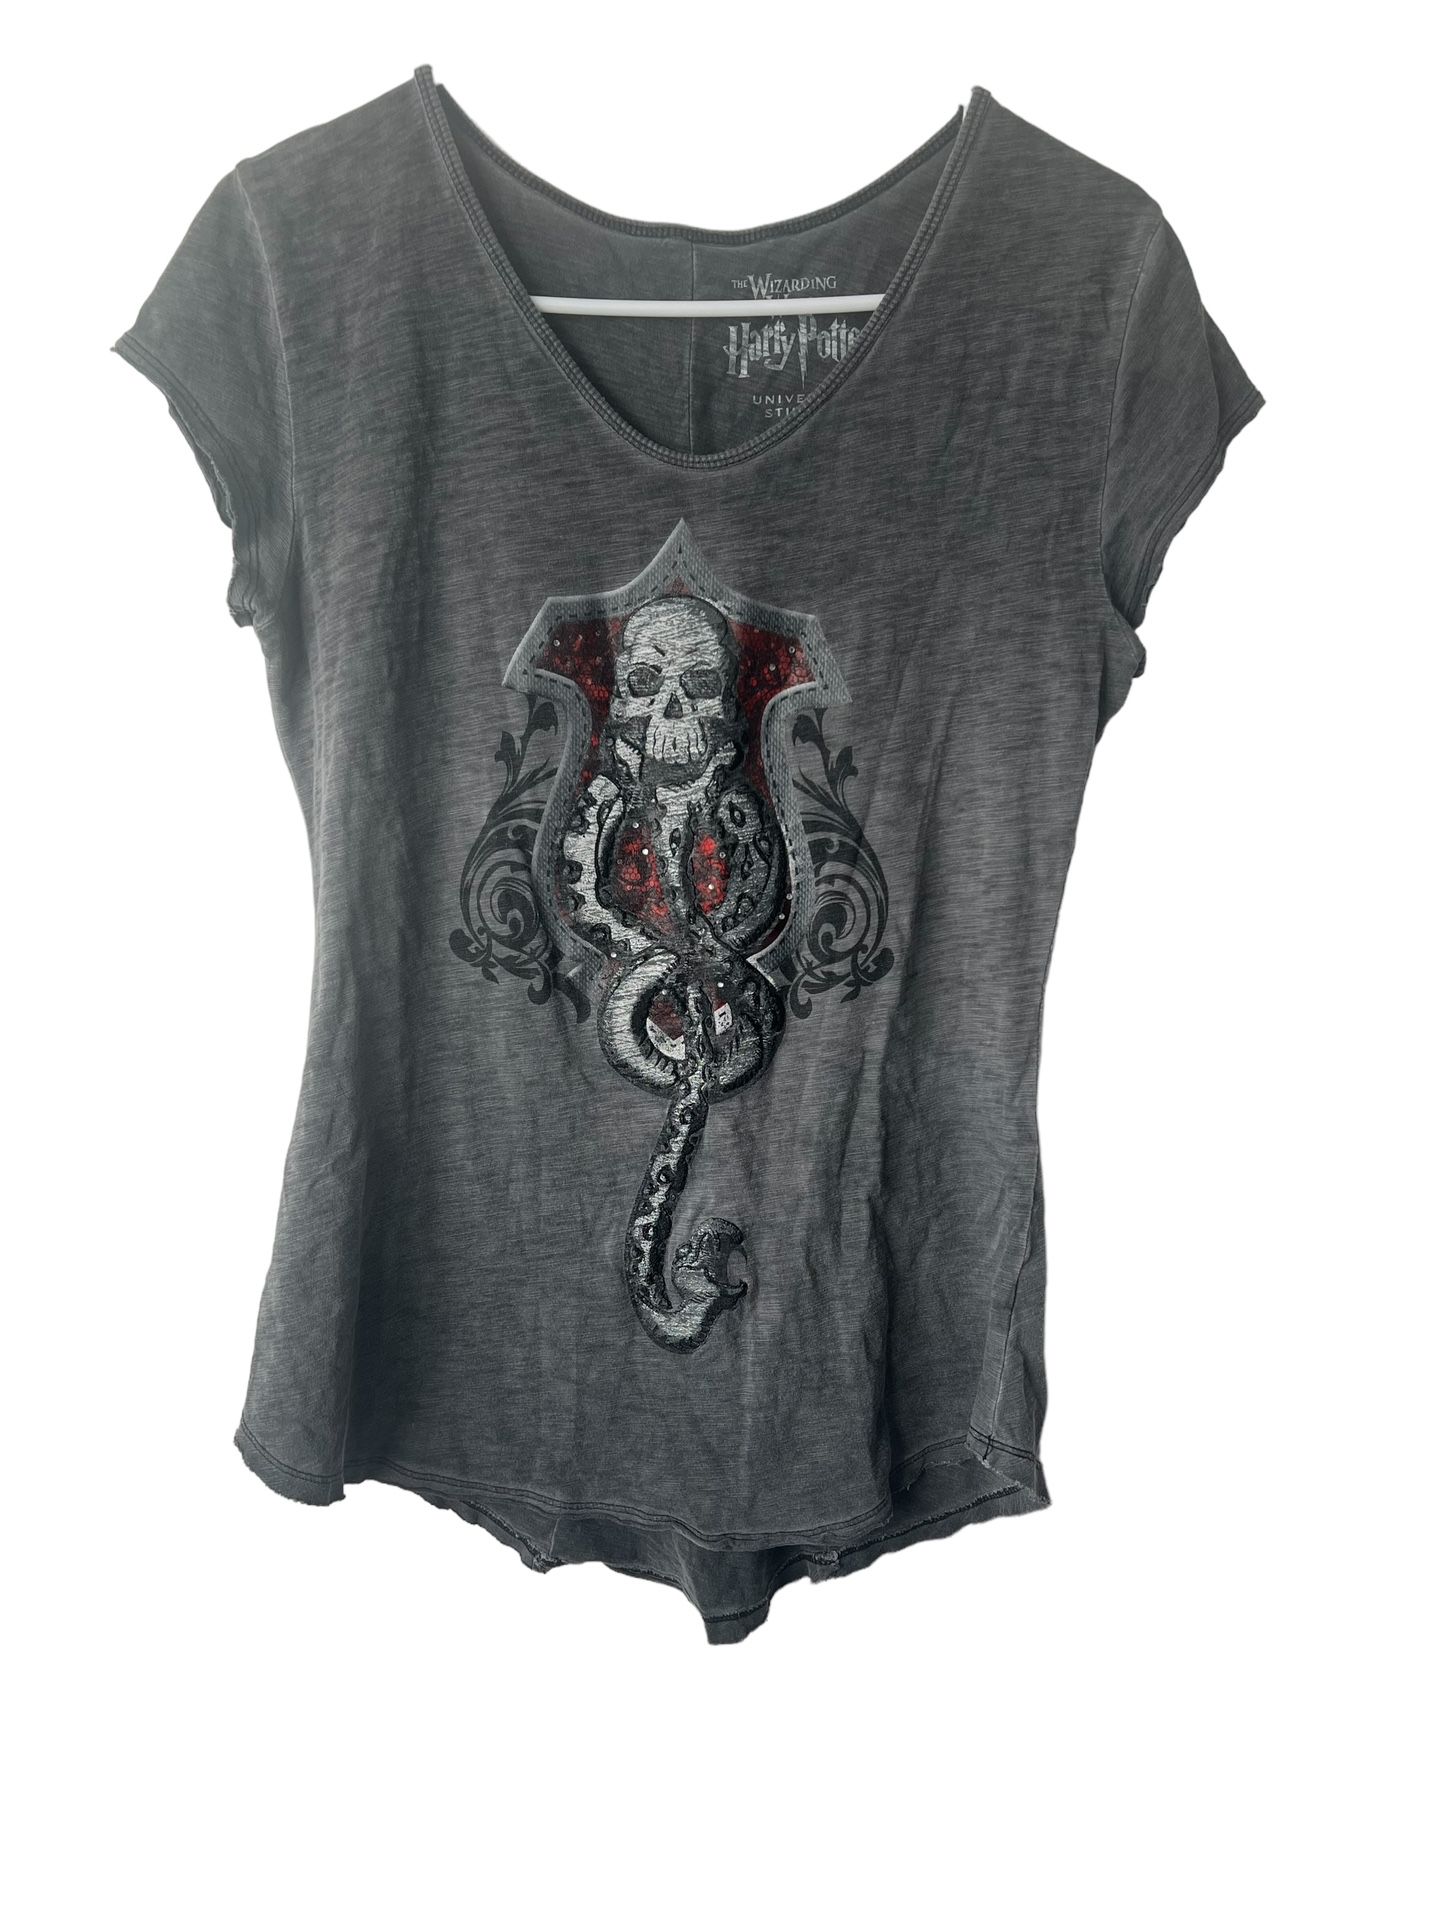 Harry Potter Charcoal Gray Dark Mark Tunic Top Womens Size S-L Wizarding World.   Movie, Harry Potter, Dark Mark, Death Eater, Lord Voldermort, Univer